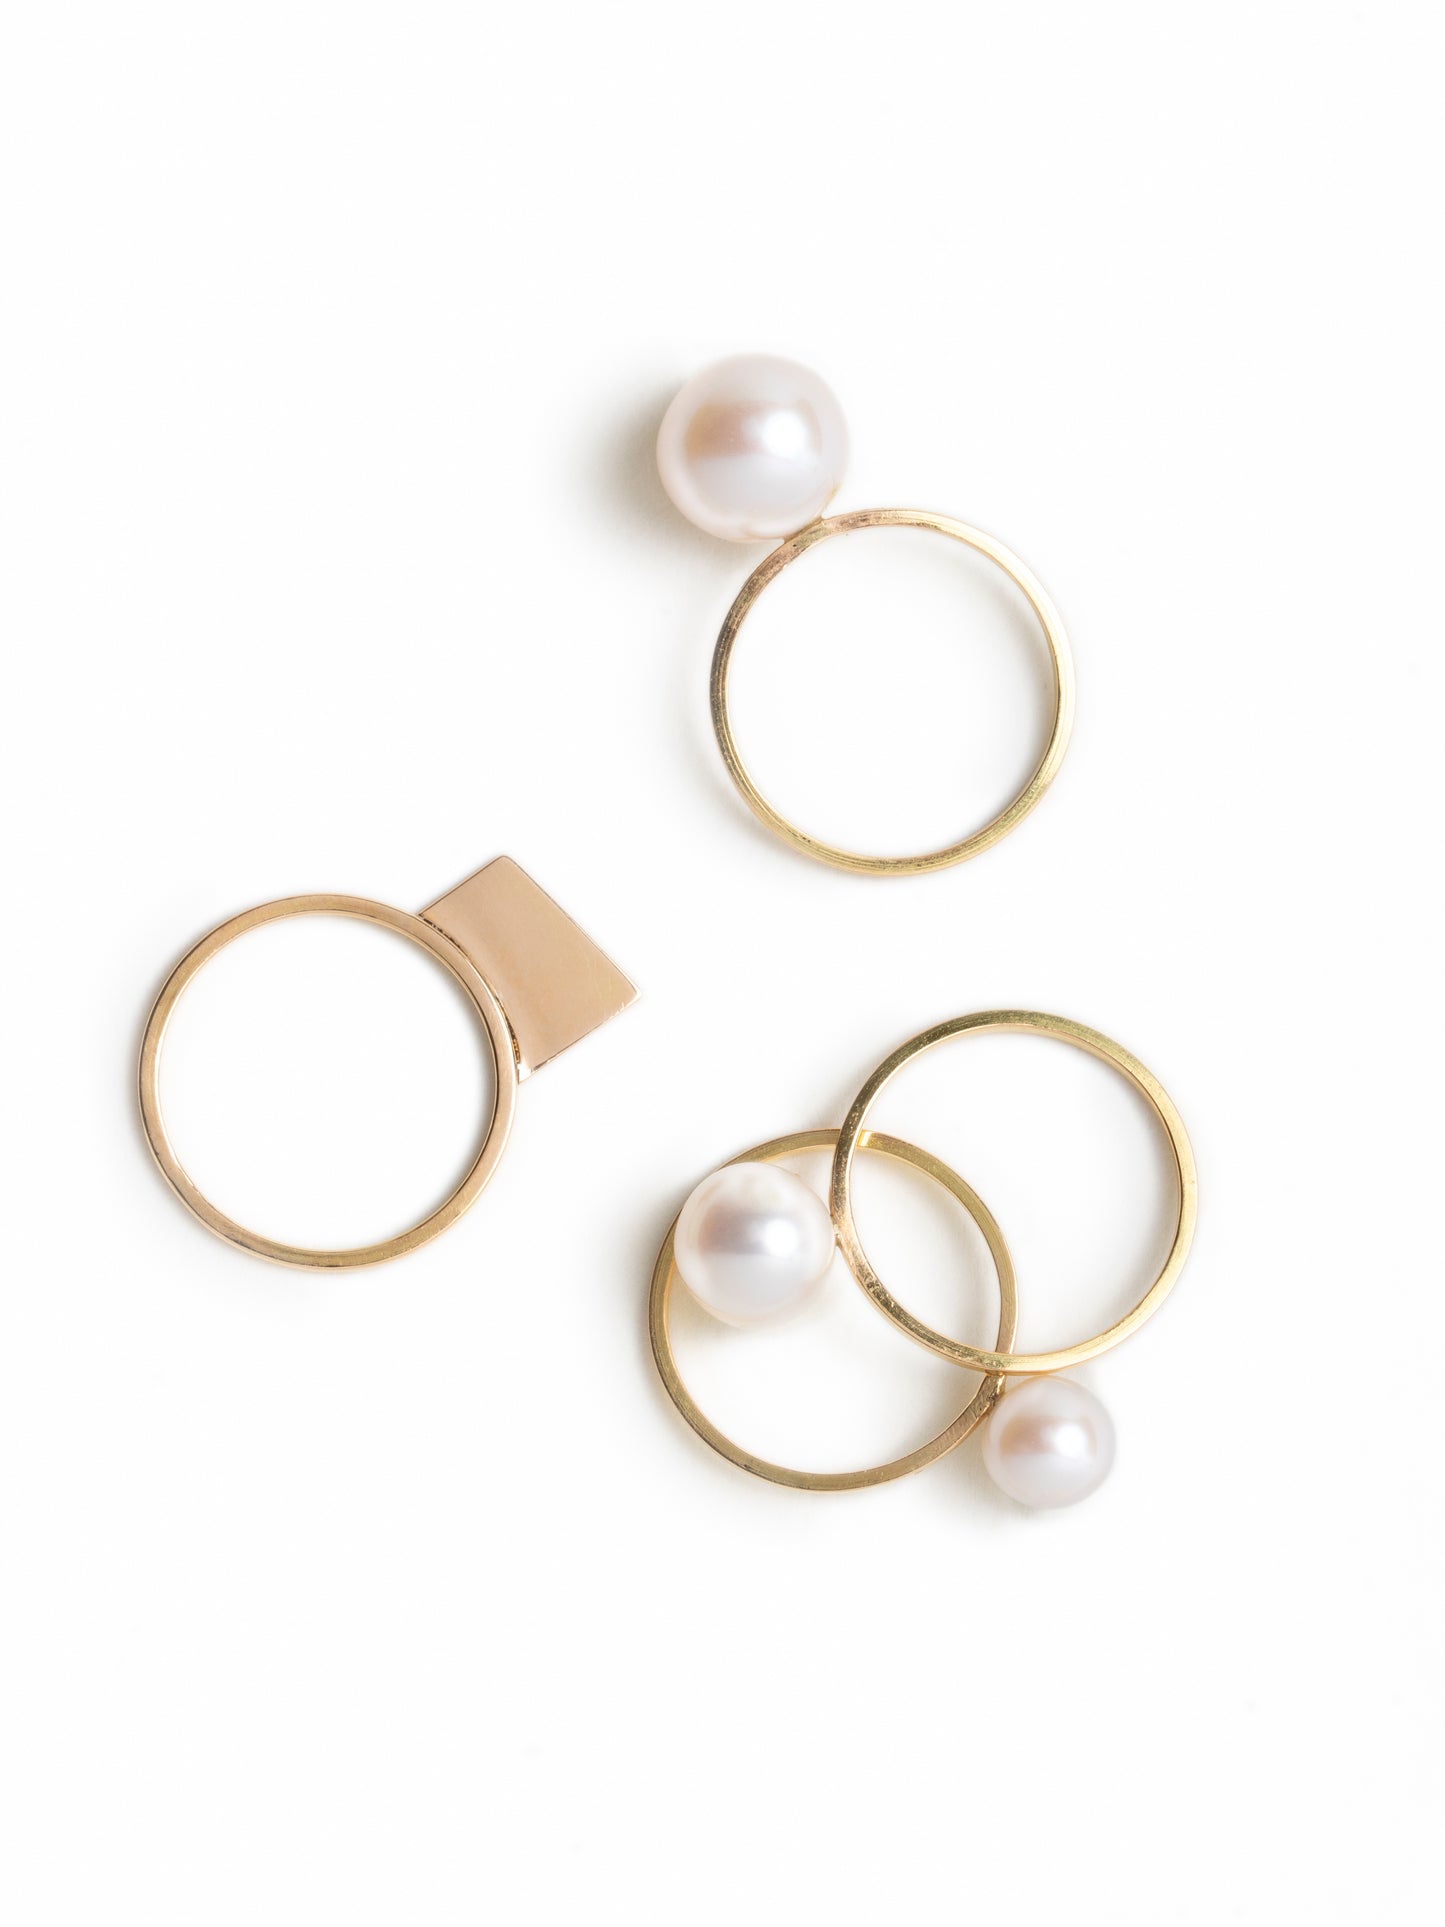 GOLD RING WITH PEARL I